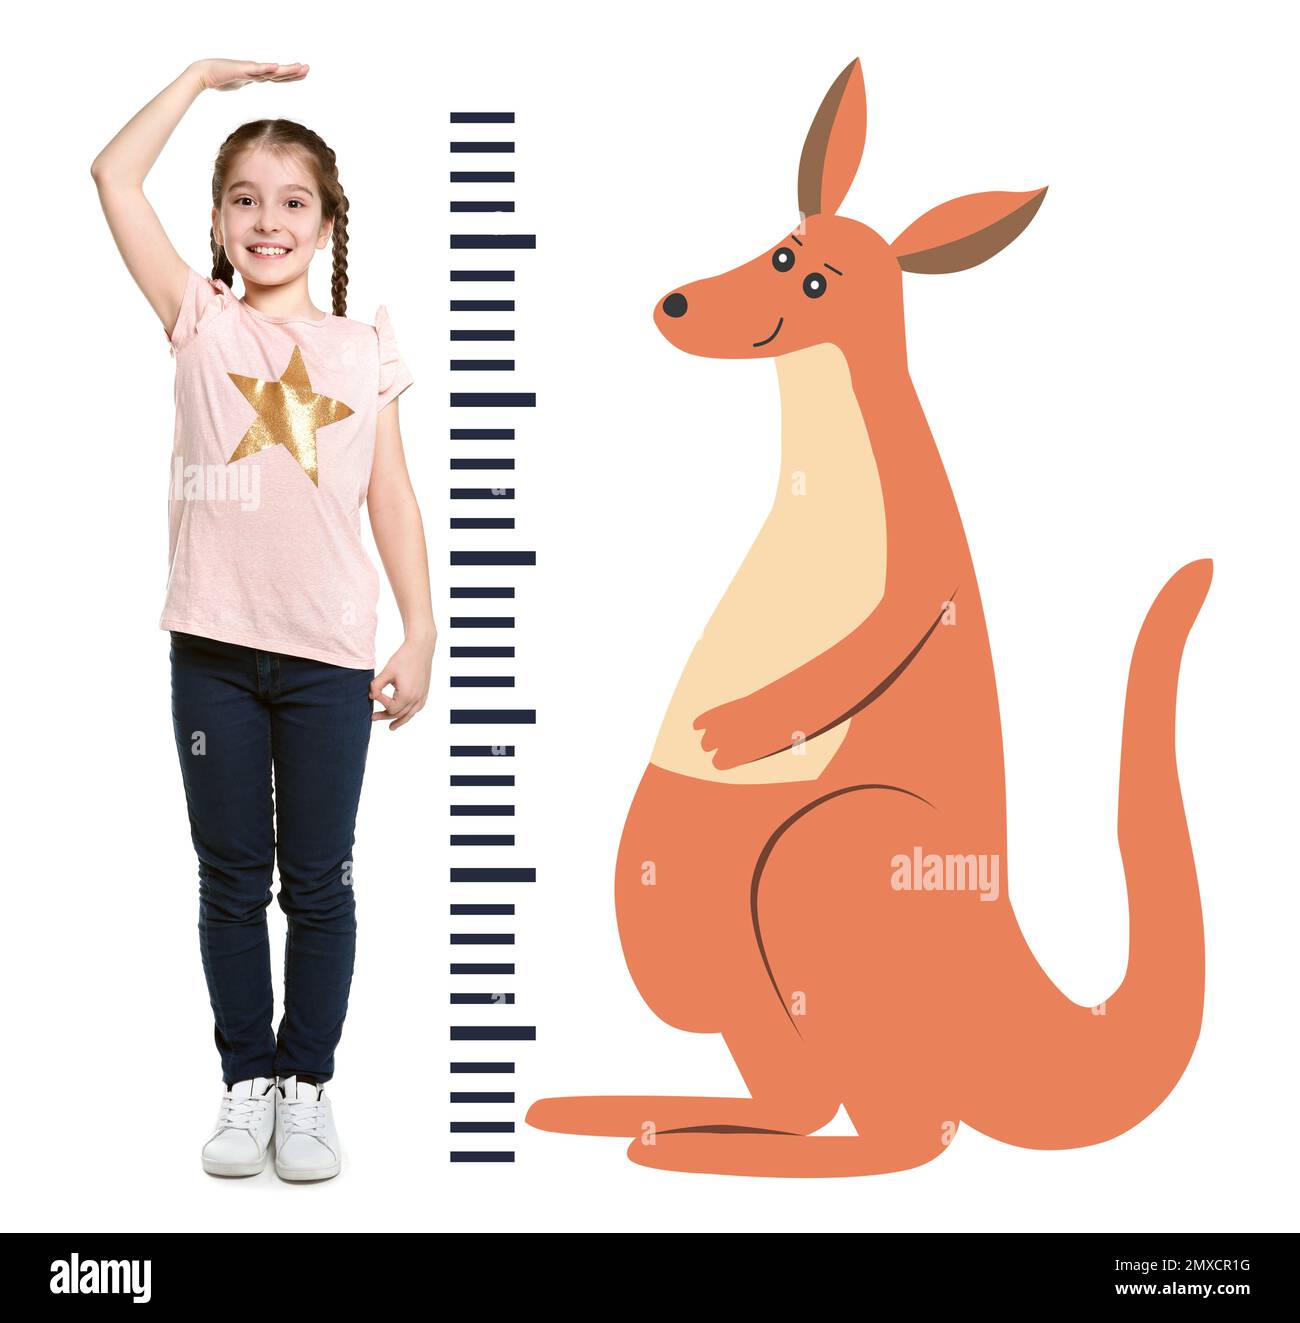 Little girl measuring height and drawing of kangaroo on white background Stock Photo